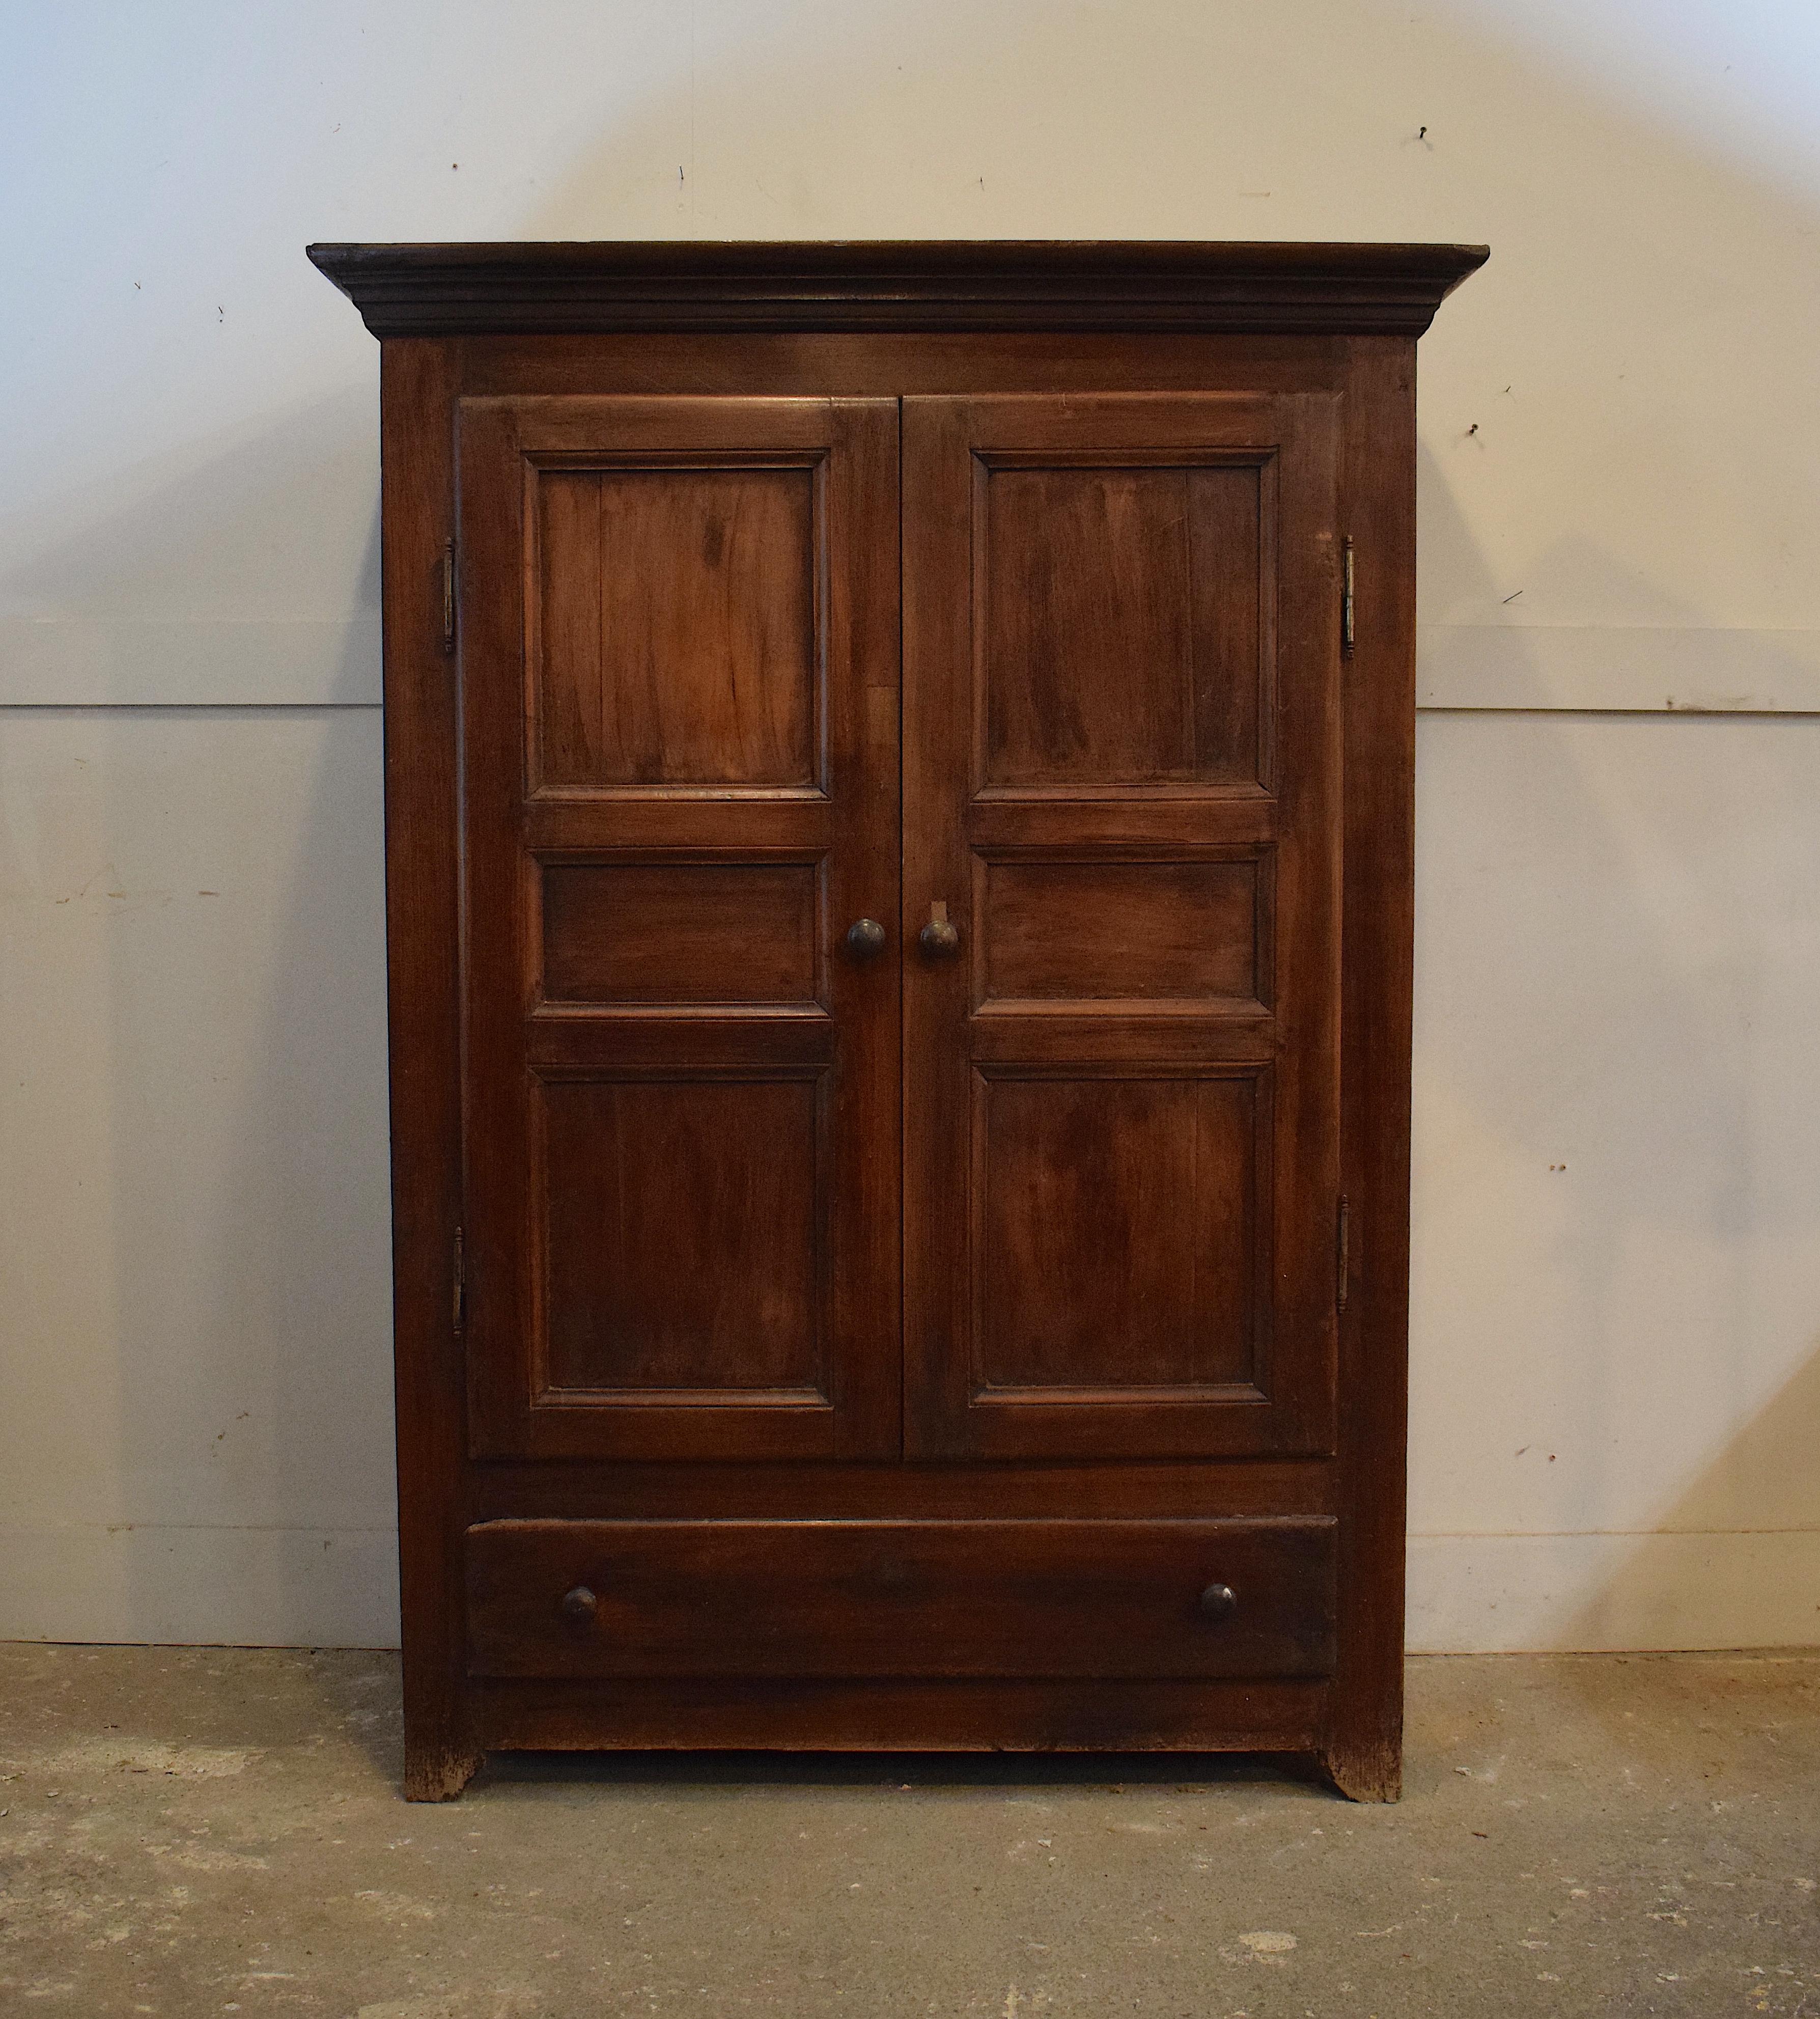 An antique French solid walnut wardrobe made around 1850. It is rustic in its structure and it is traditional to the furniture produced during the Louis Philippe period which reflected a simplicity in its design compared to previous periods in